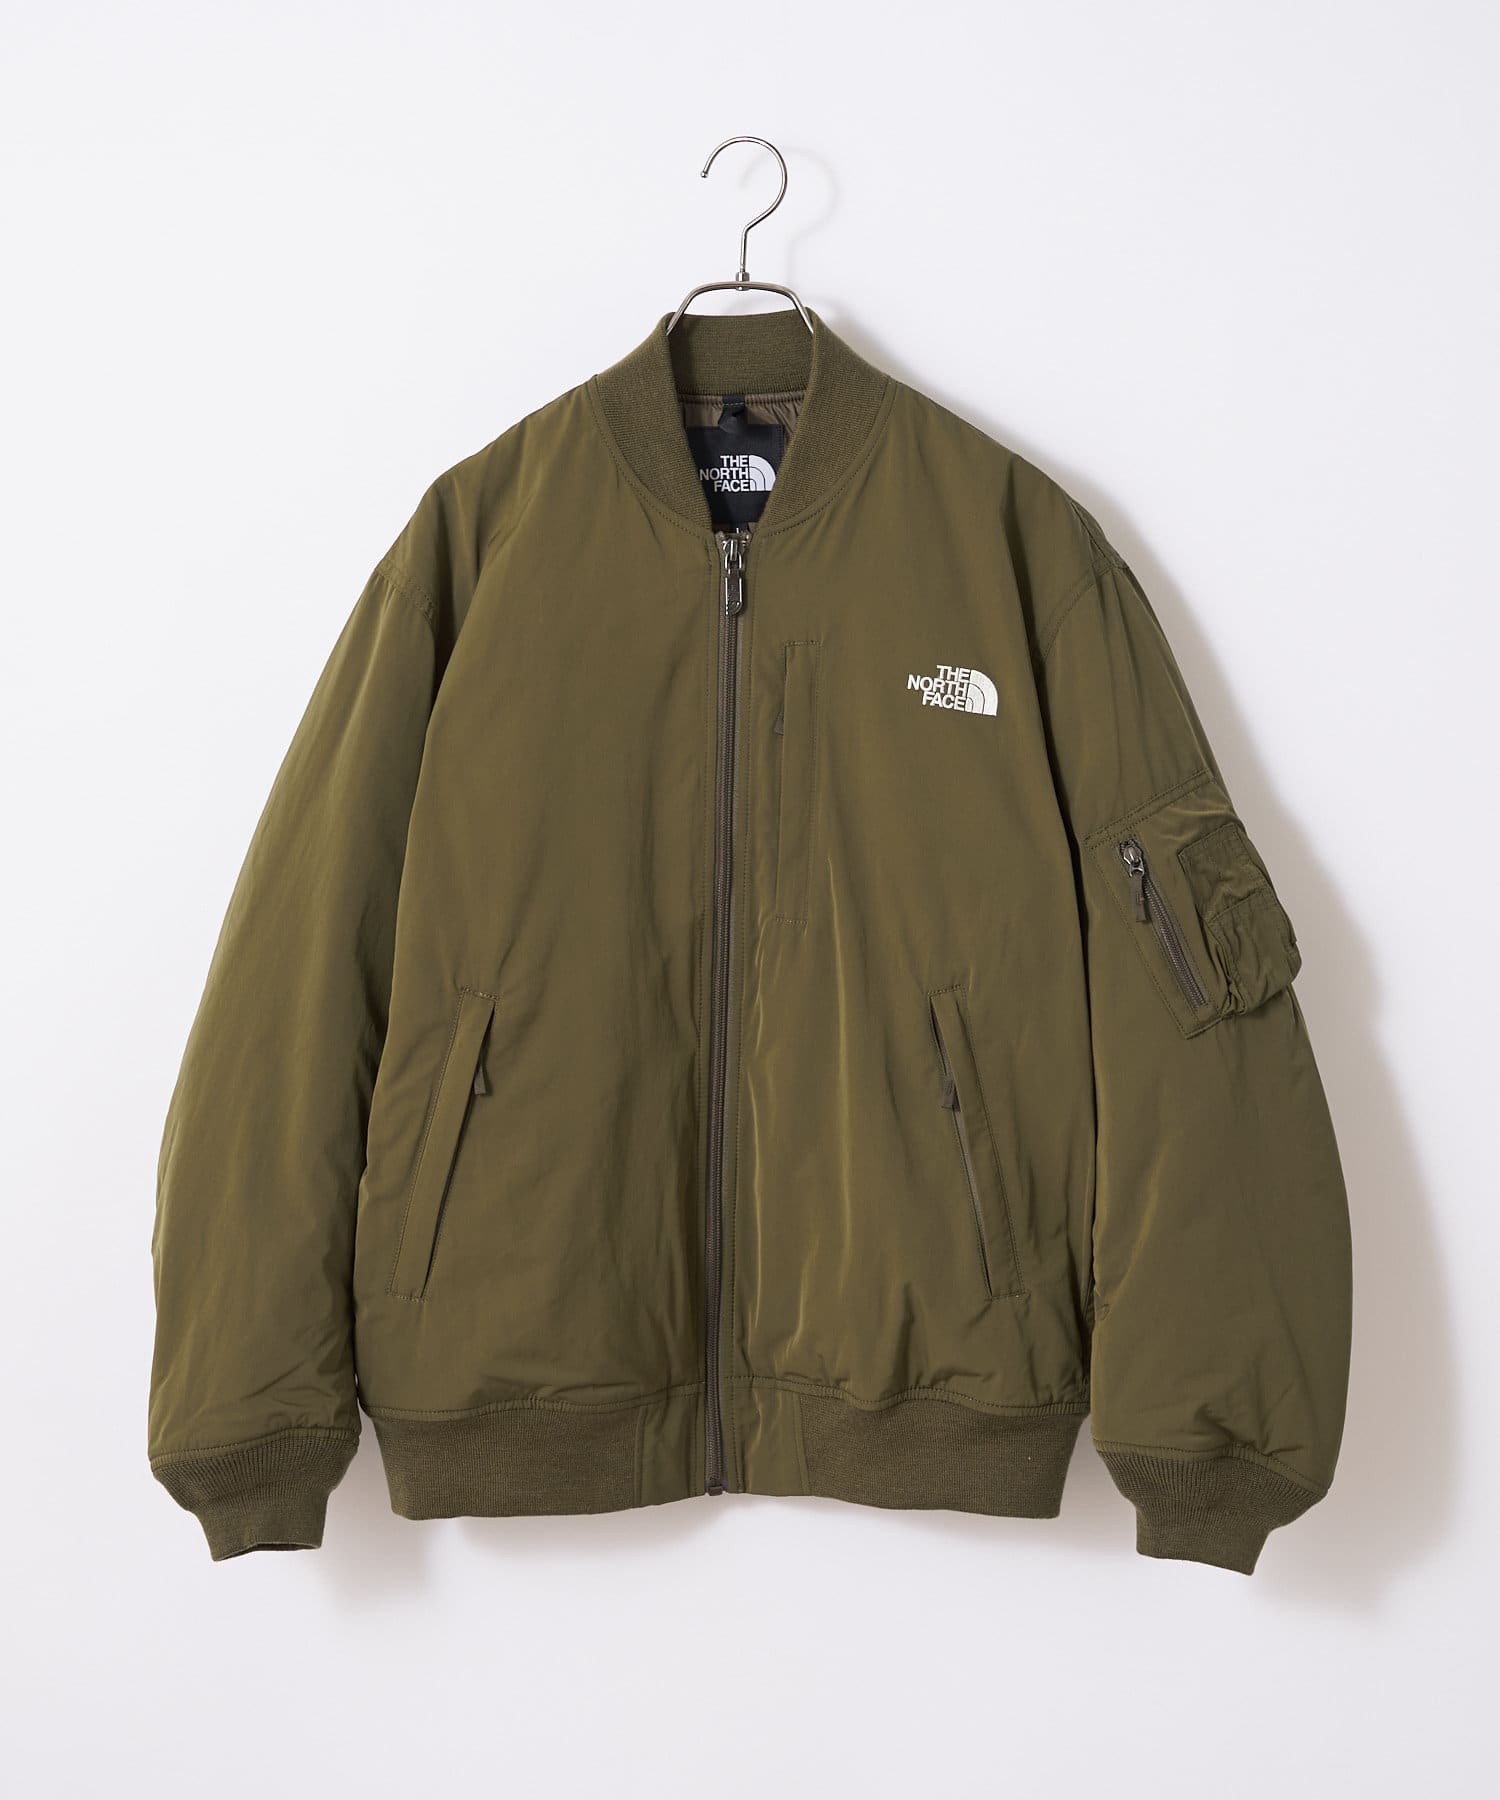 THE NORTH FACE】Insulation Bomber Jacket | CIAOPANIC(チャオ 